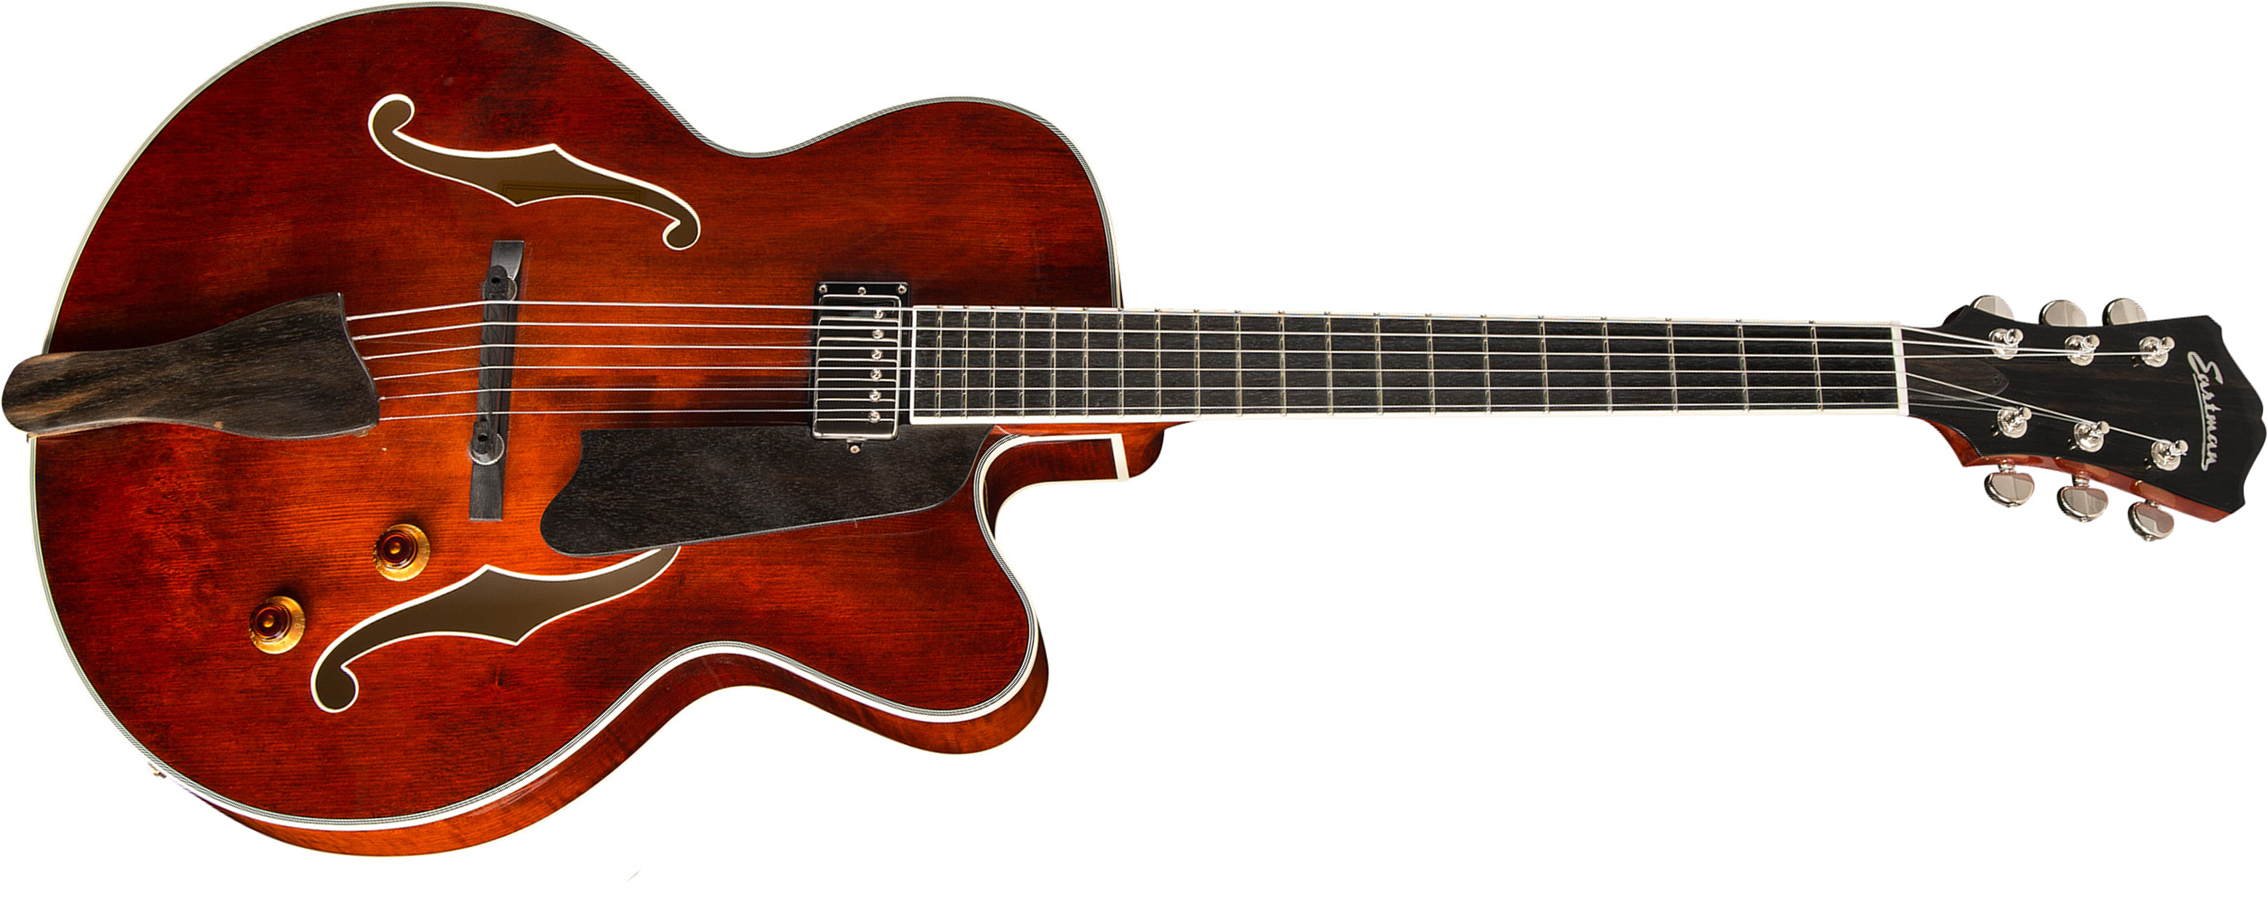 Eastman Ar503ce Archtop Solid Top H Ht Eb - Classic - Semi-hollow electric guitar - Main picture